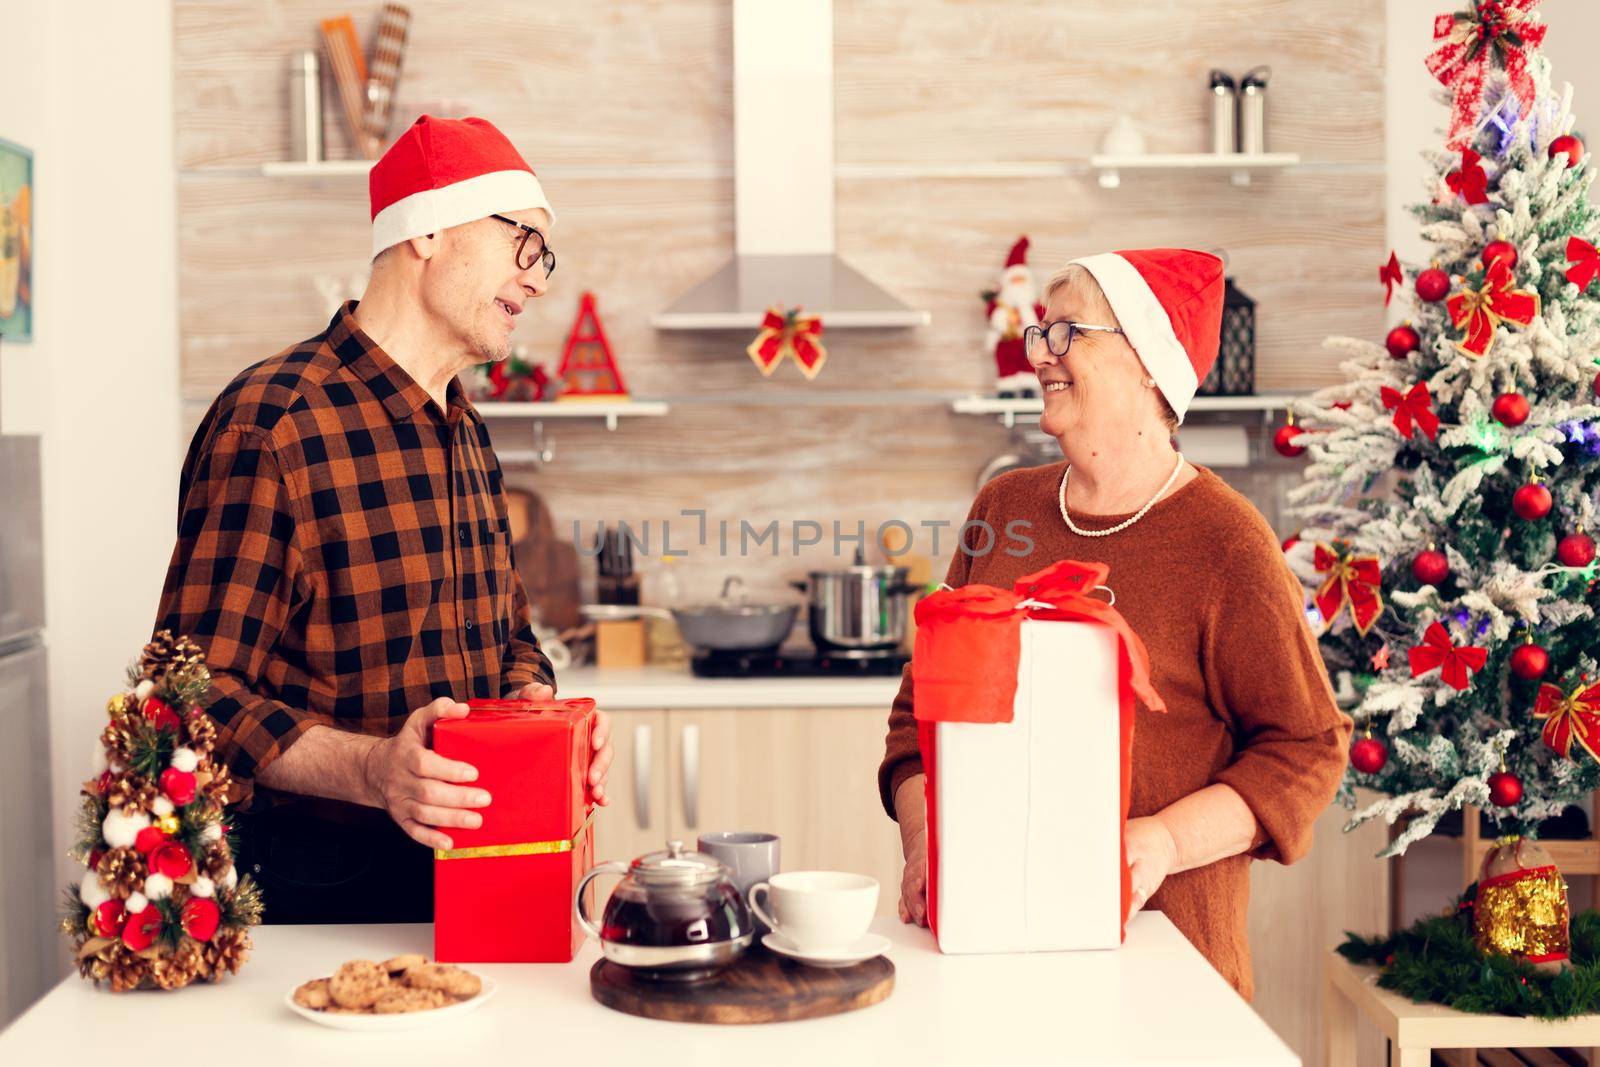 Happy grandparents celebrating christmas exchanging presents with red bow. Senior man and woman wearing santa hat during christmas giving elderly woman gift box with christmastree in the background.